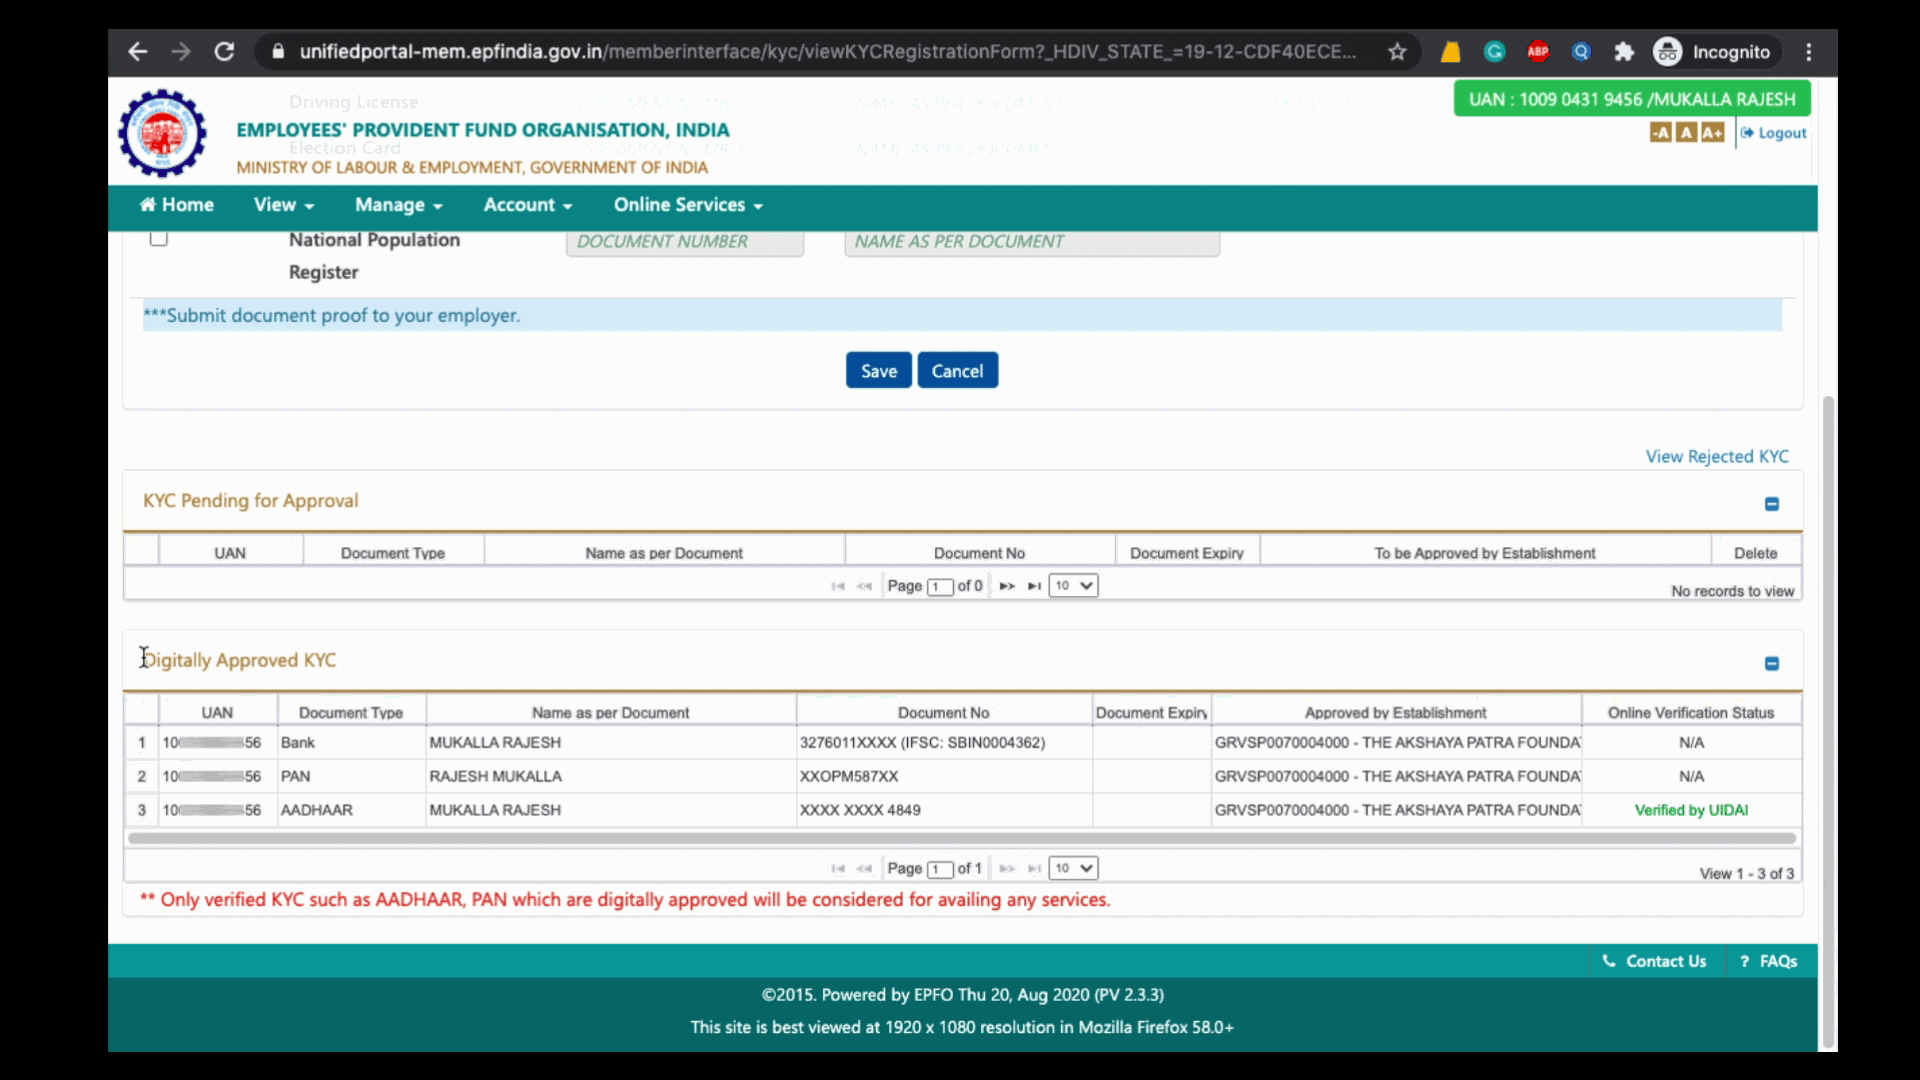 Your bank KYC is not digitally signed by employer, cannot proceed. error